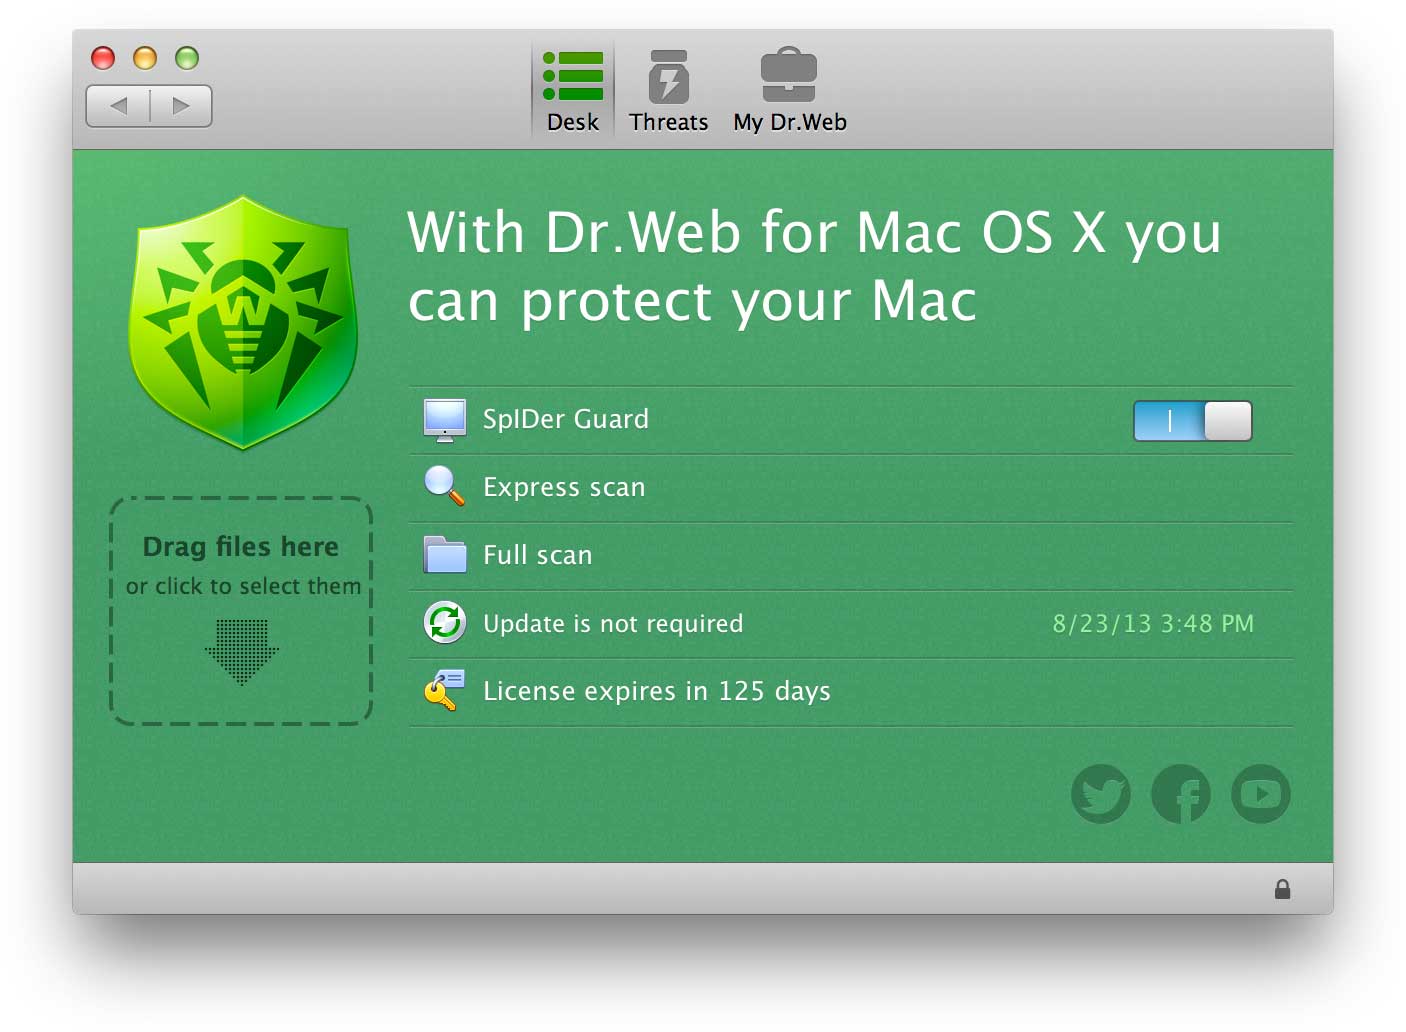 Dr. Web Antivirus for macOS deploys the usual interface, as you can see.